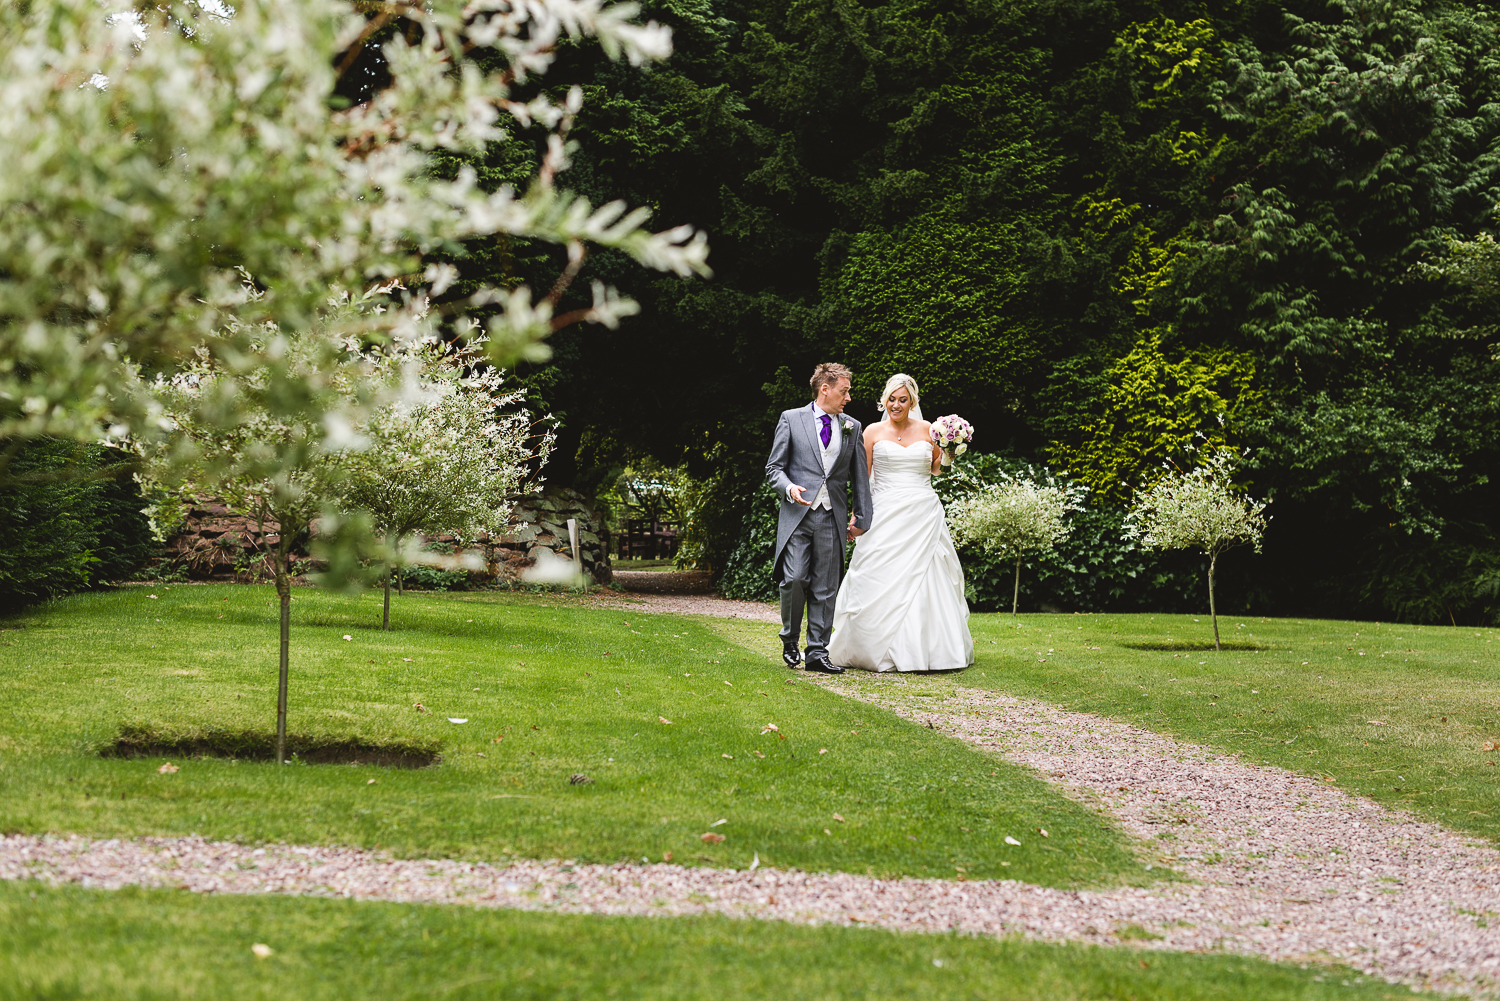 Autumn Wedding Photography at Mere Court Hotel, Knutsford, Cheshire ...